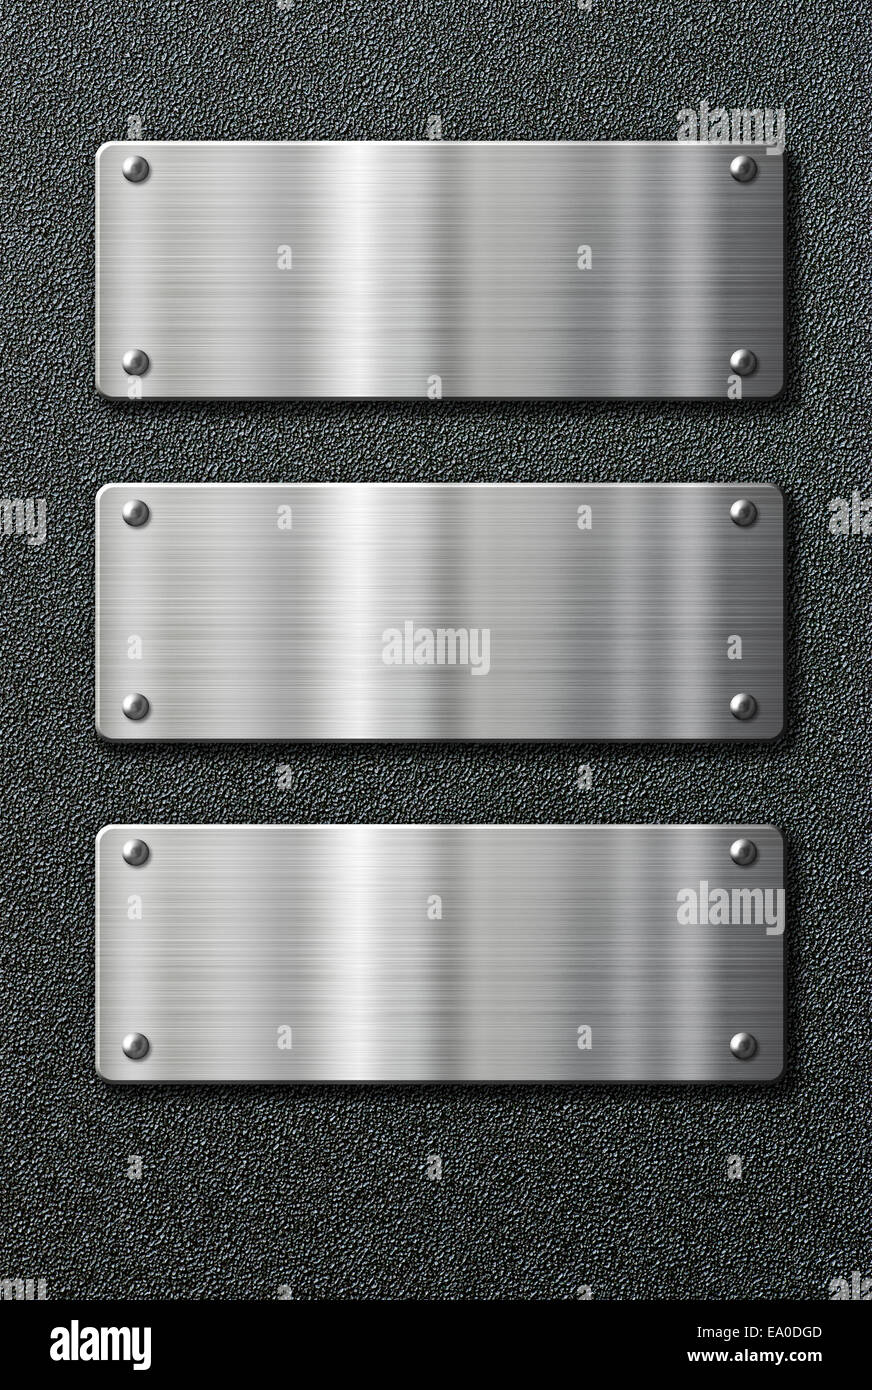 three stainless steel metal plates on black background Stock Photo